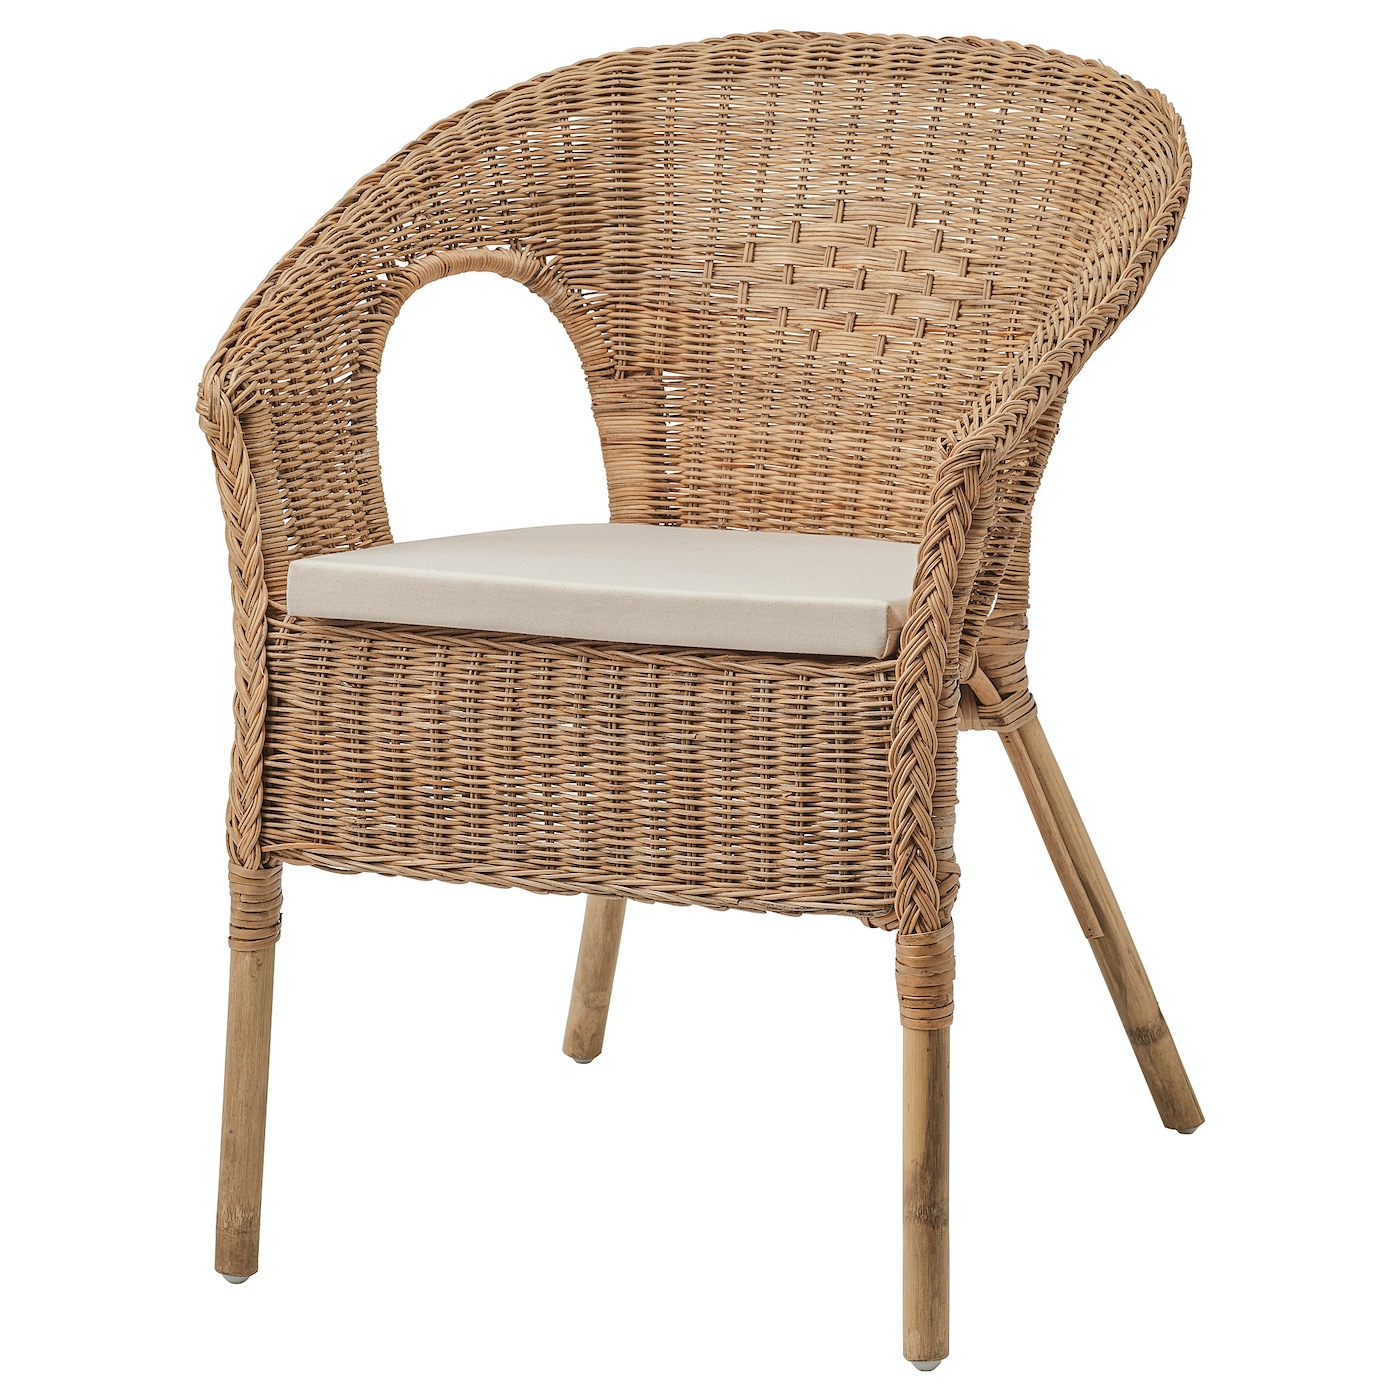 AGEN armchair with cushion rattan/Norna natural - IKEA